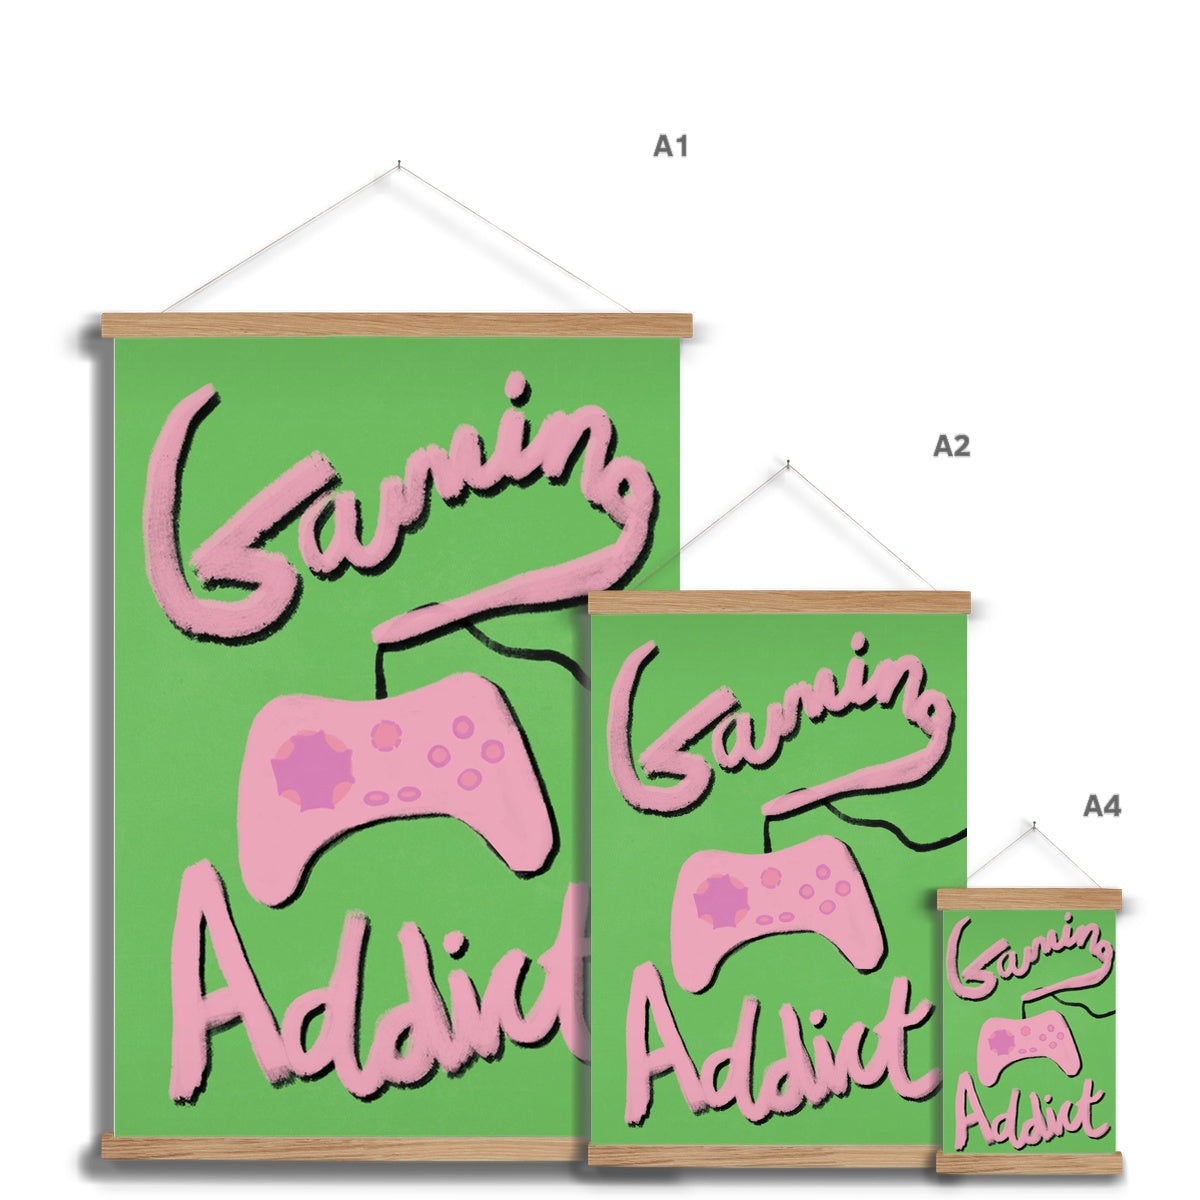 Gaming Addict Print - Green, Pink Fine Art Print with Hanger